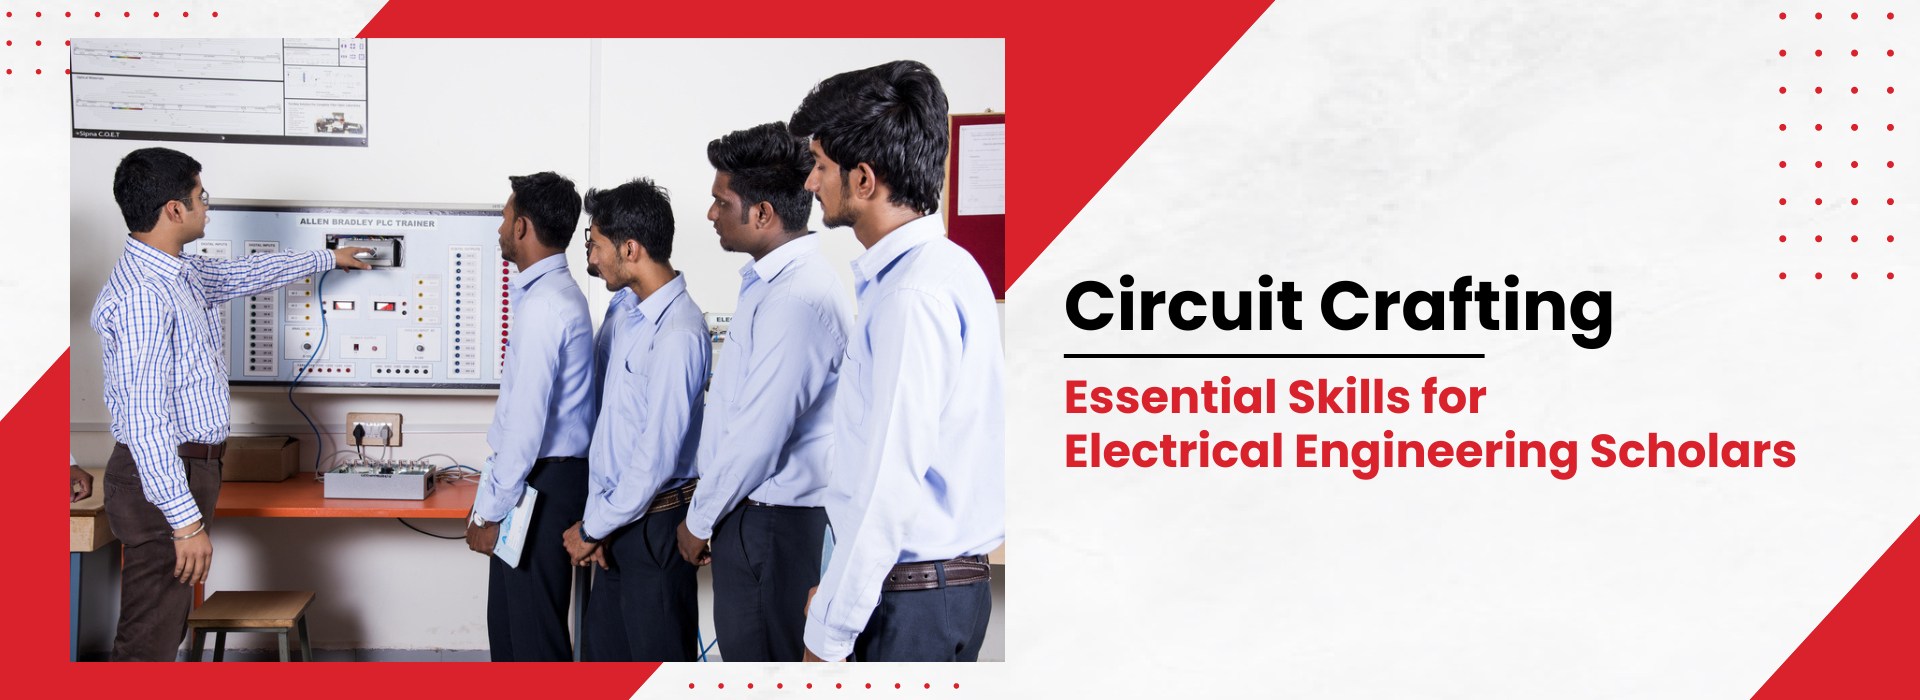 Circuit Crafting: Essential Skills for Electrical Engineering Scholars​